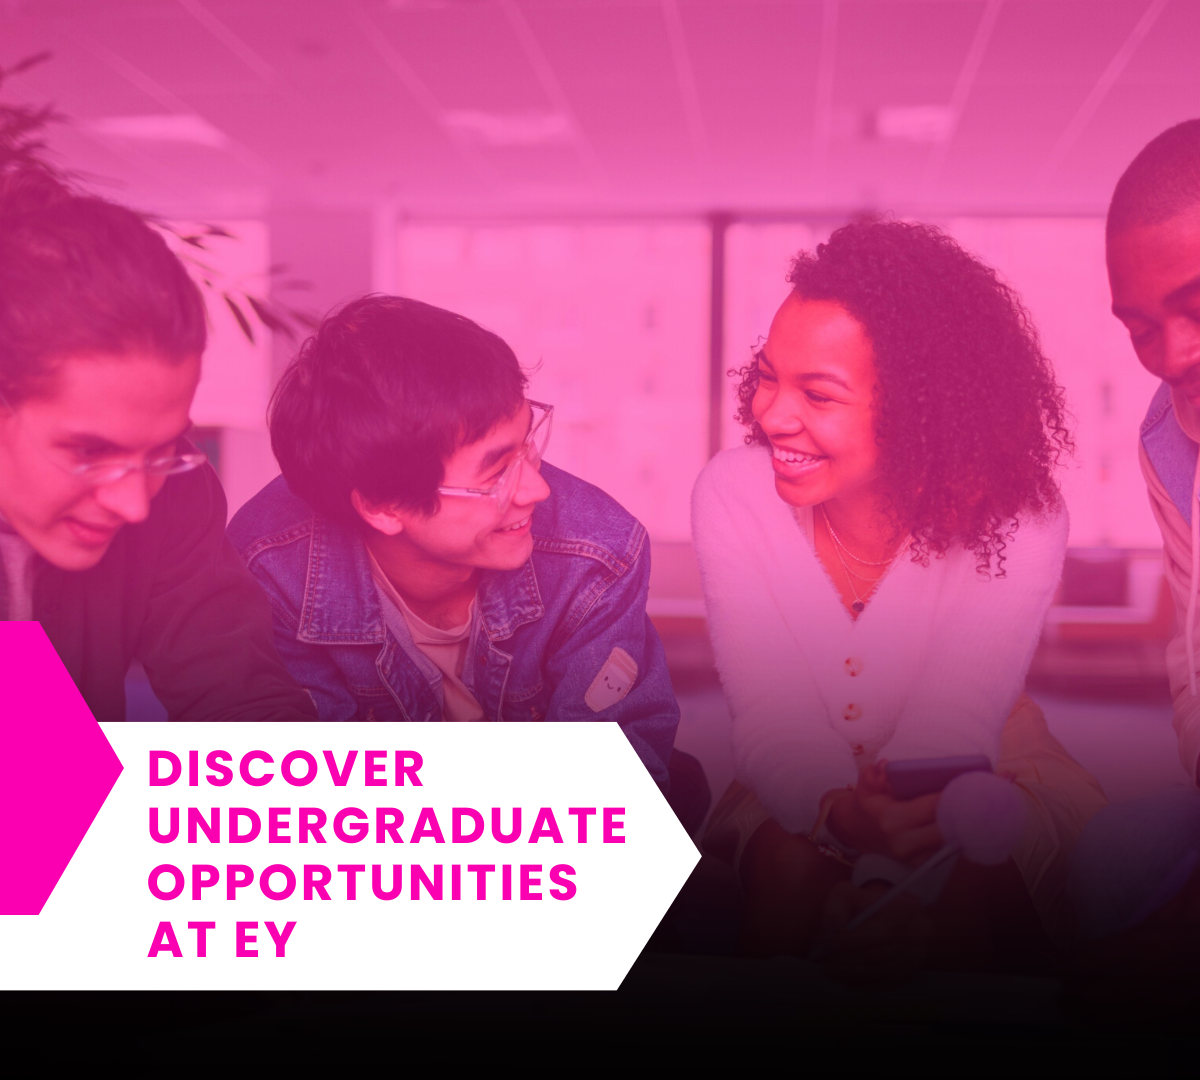 EY: Discover undergraduate opportunities at EY | NIW 2023